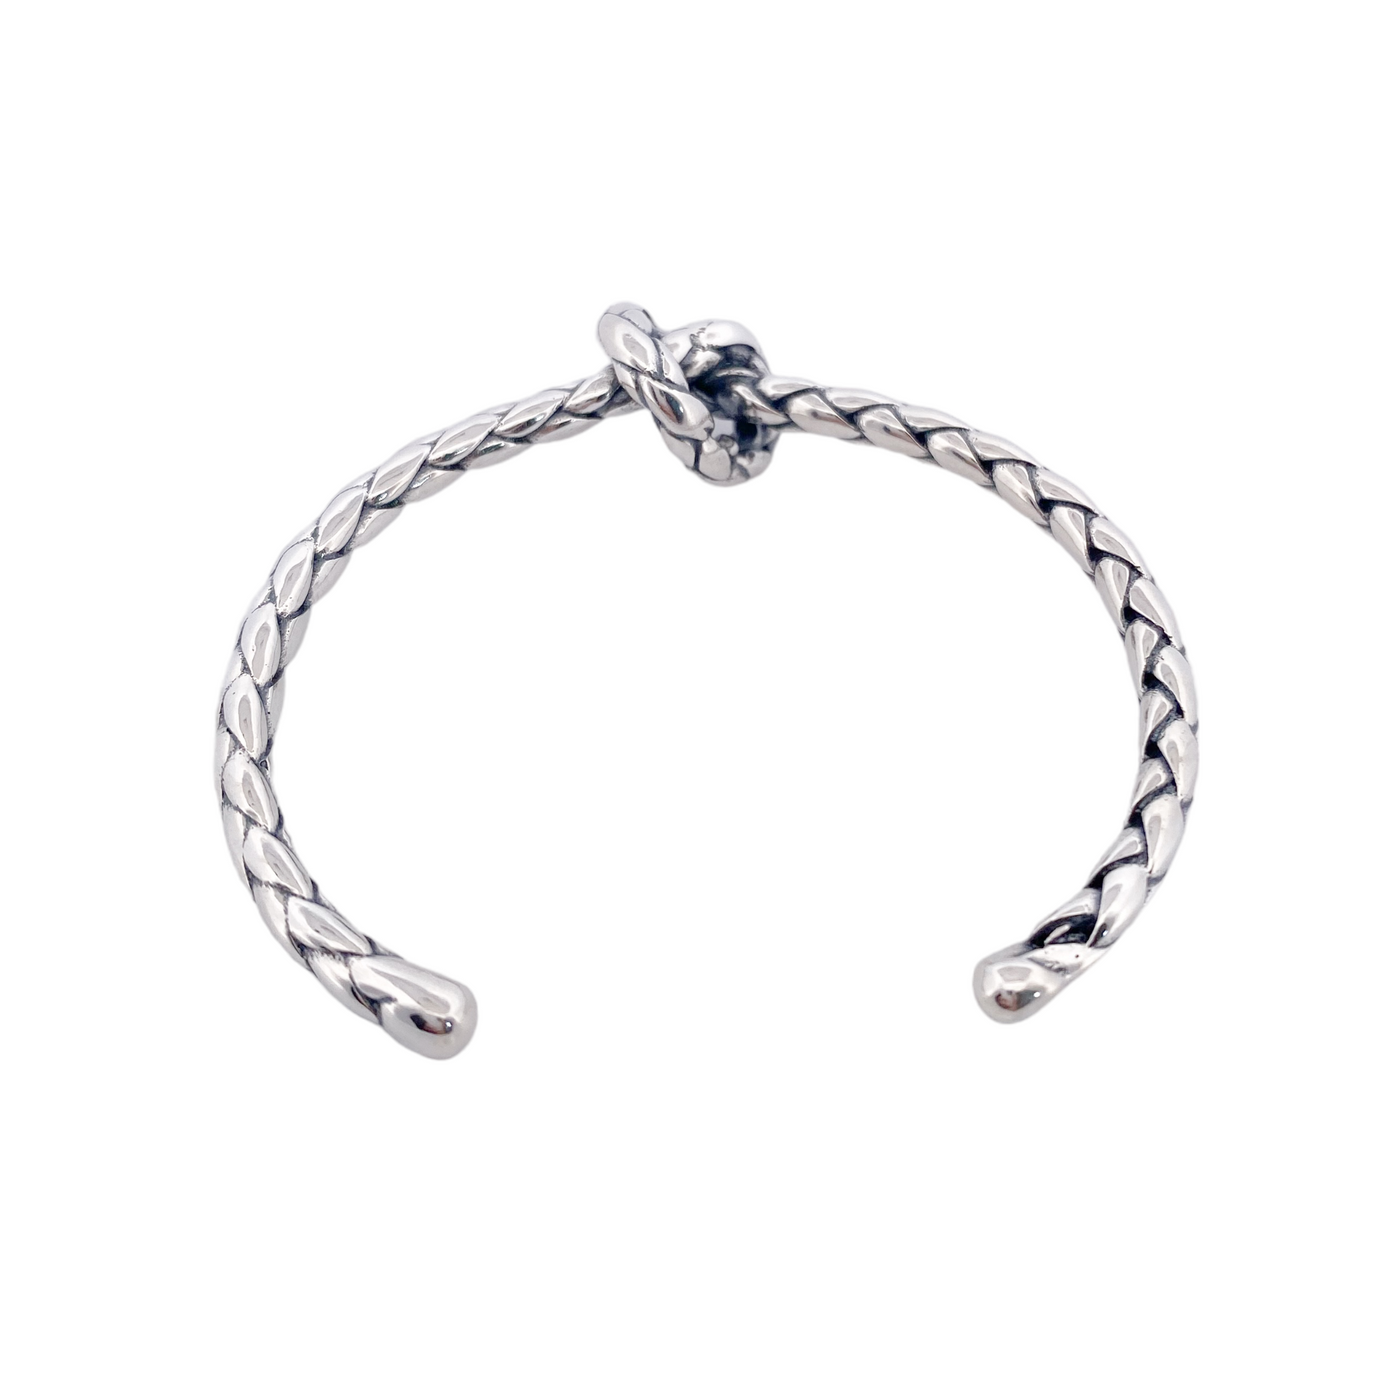 SILVER MAN BANGLE WITH KNOT